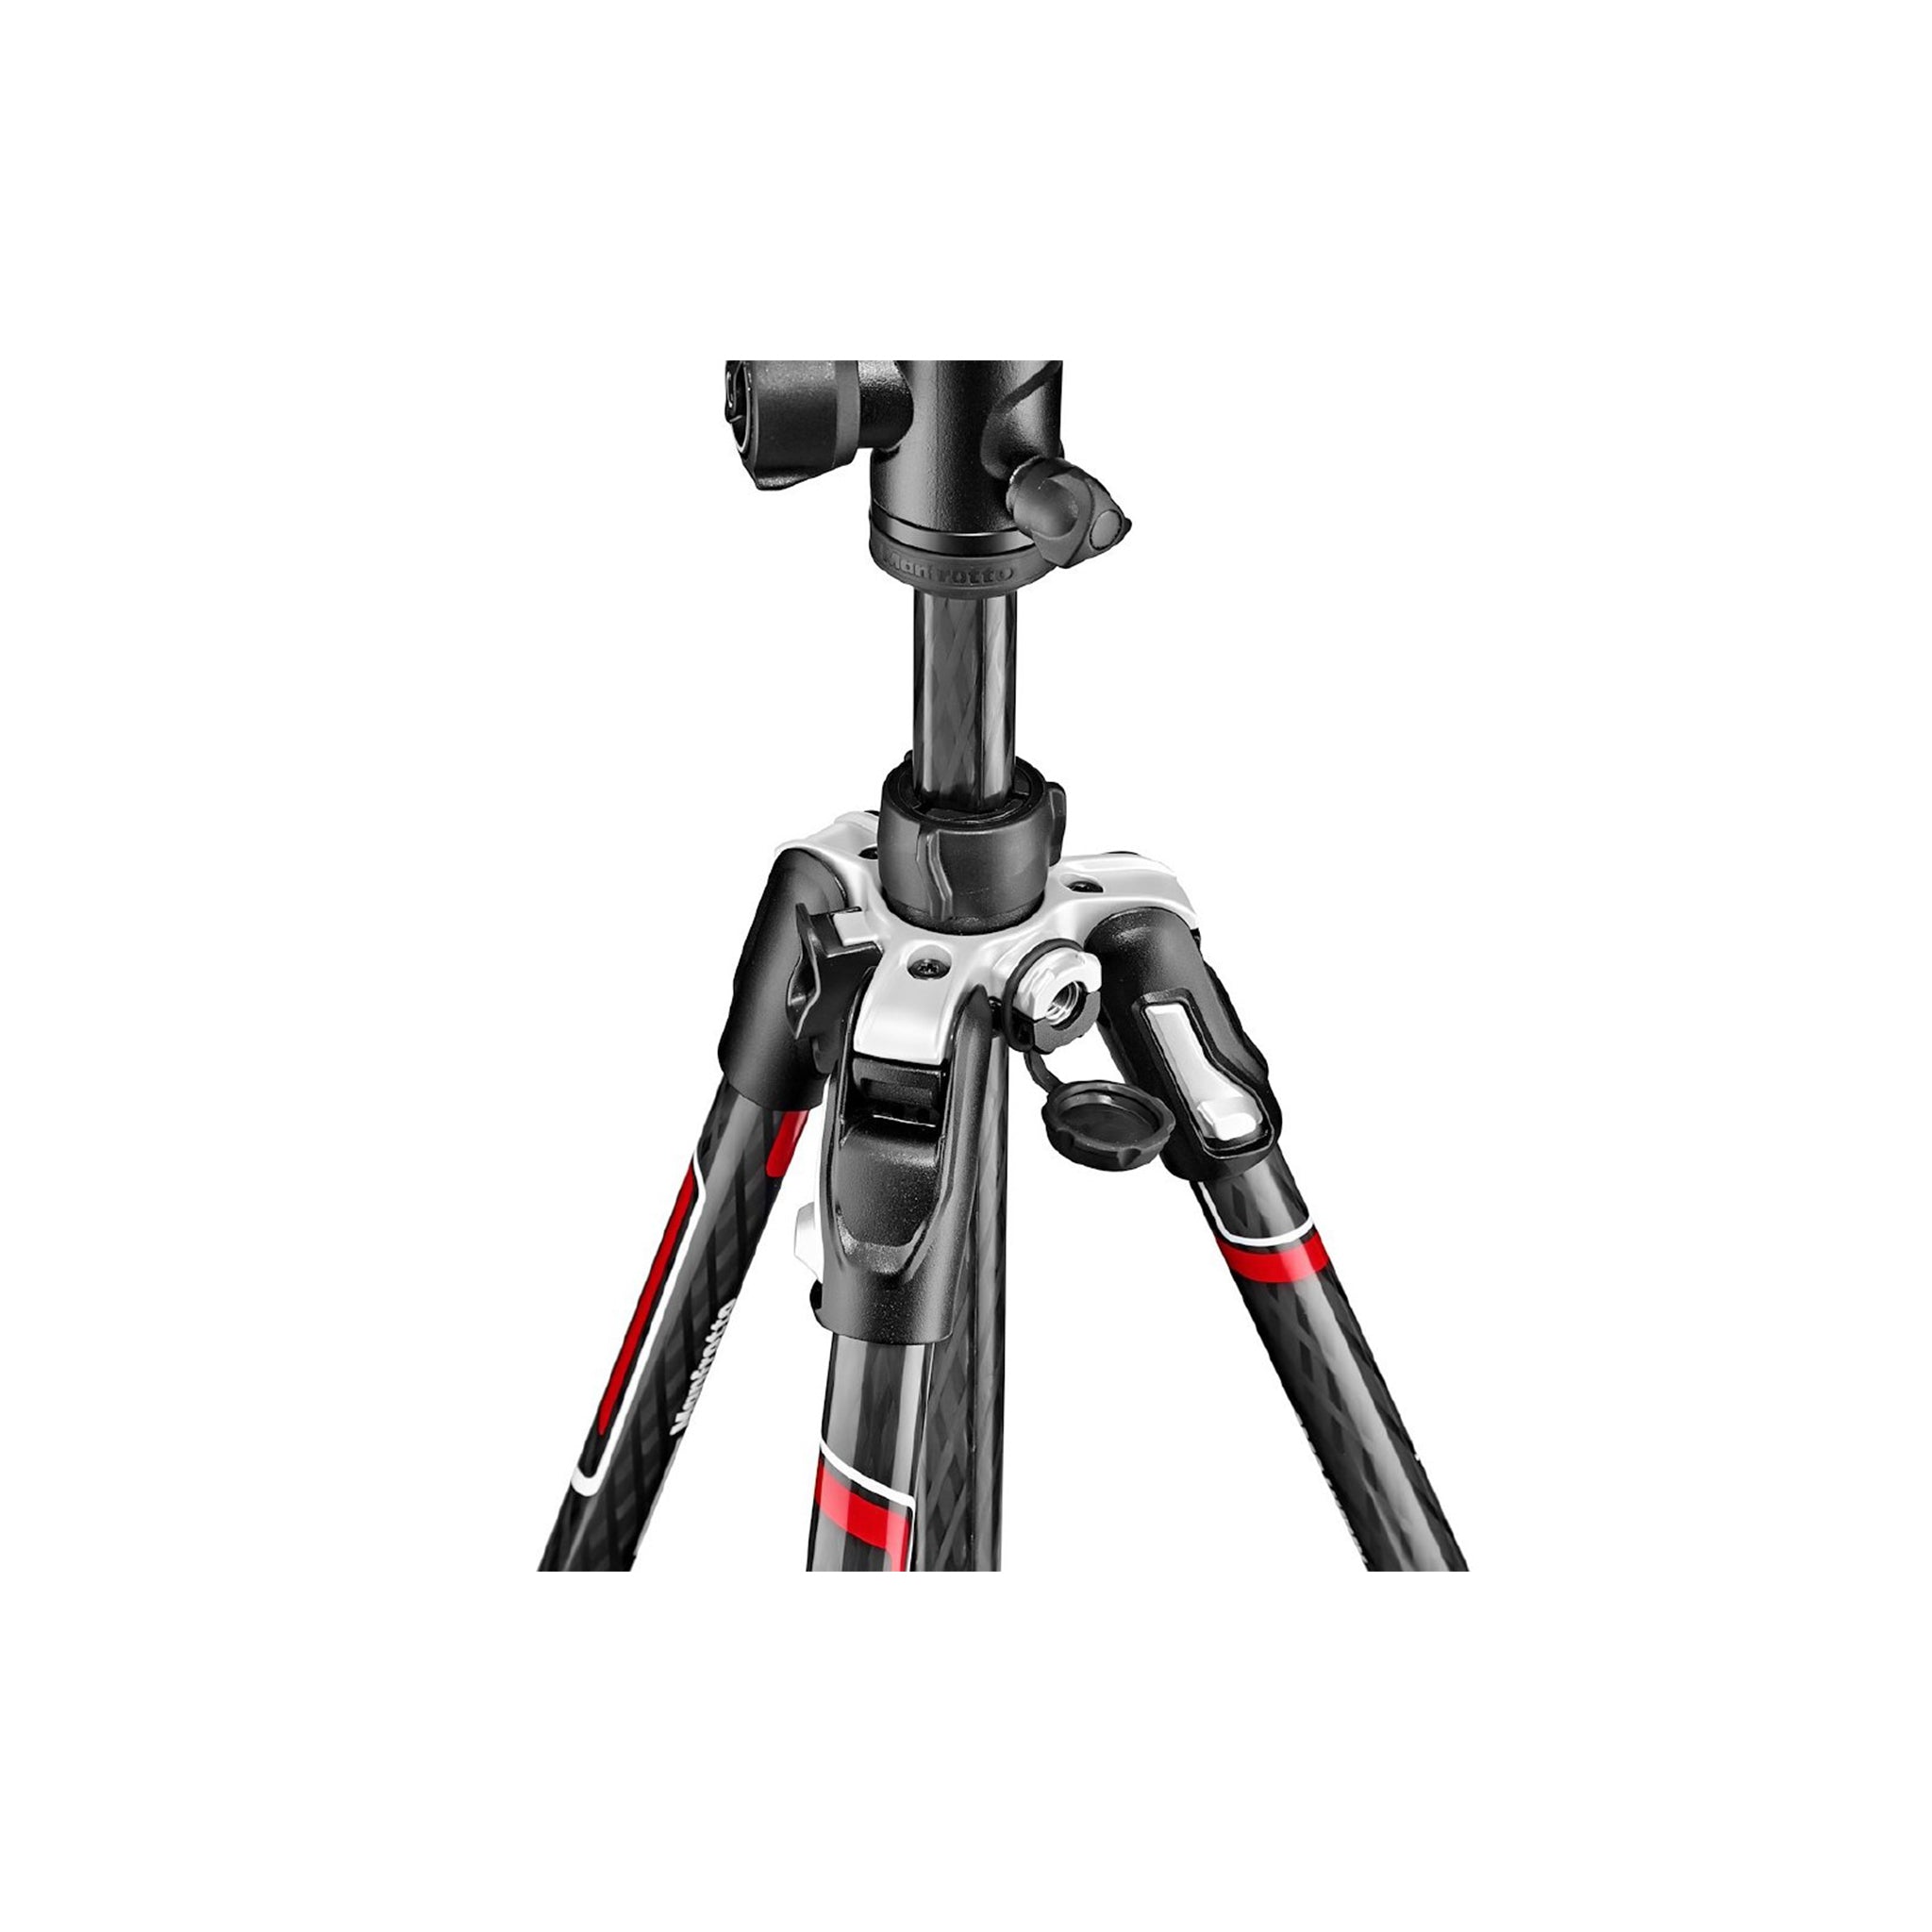 Manfrotto Befree Advanced Carbon Fibre Travel Tripod Twist With Ball Head